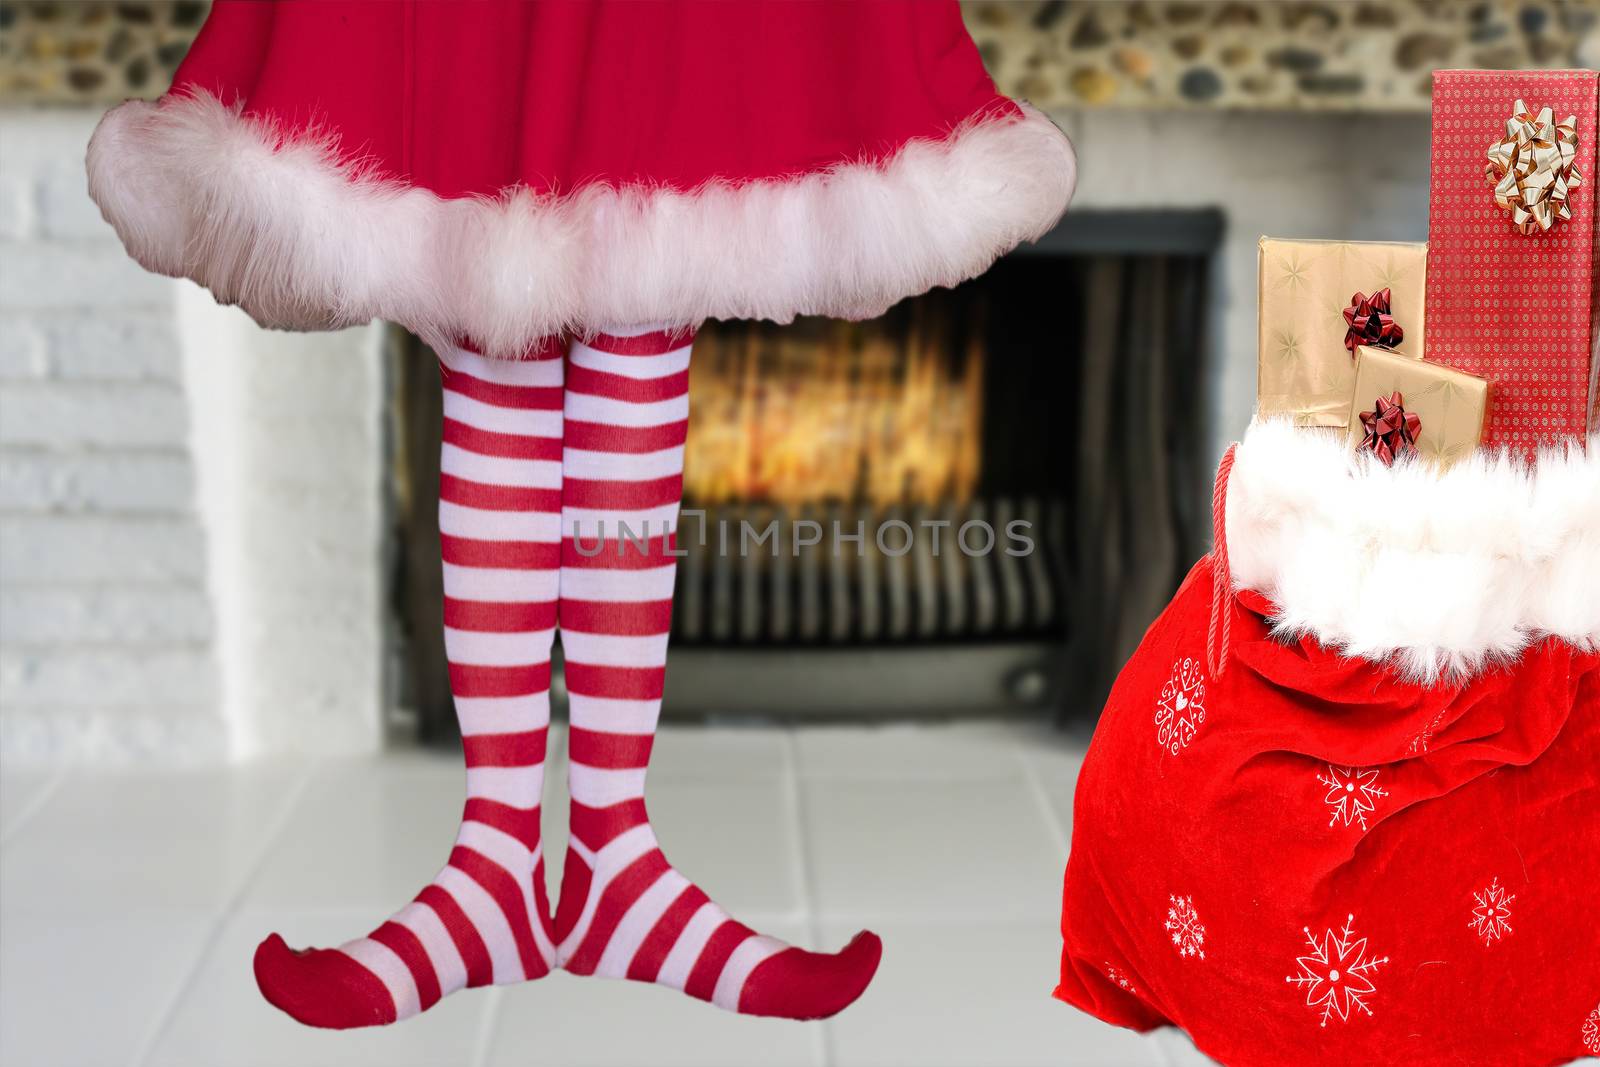 adorable cute little christmas elf girl with pointy feet wearing striped elf stockings and a red dress standing next to a santa claus bag full of presents in front of a burning fireplace